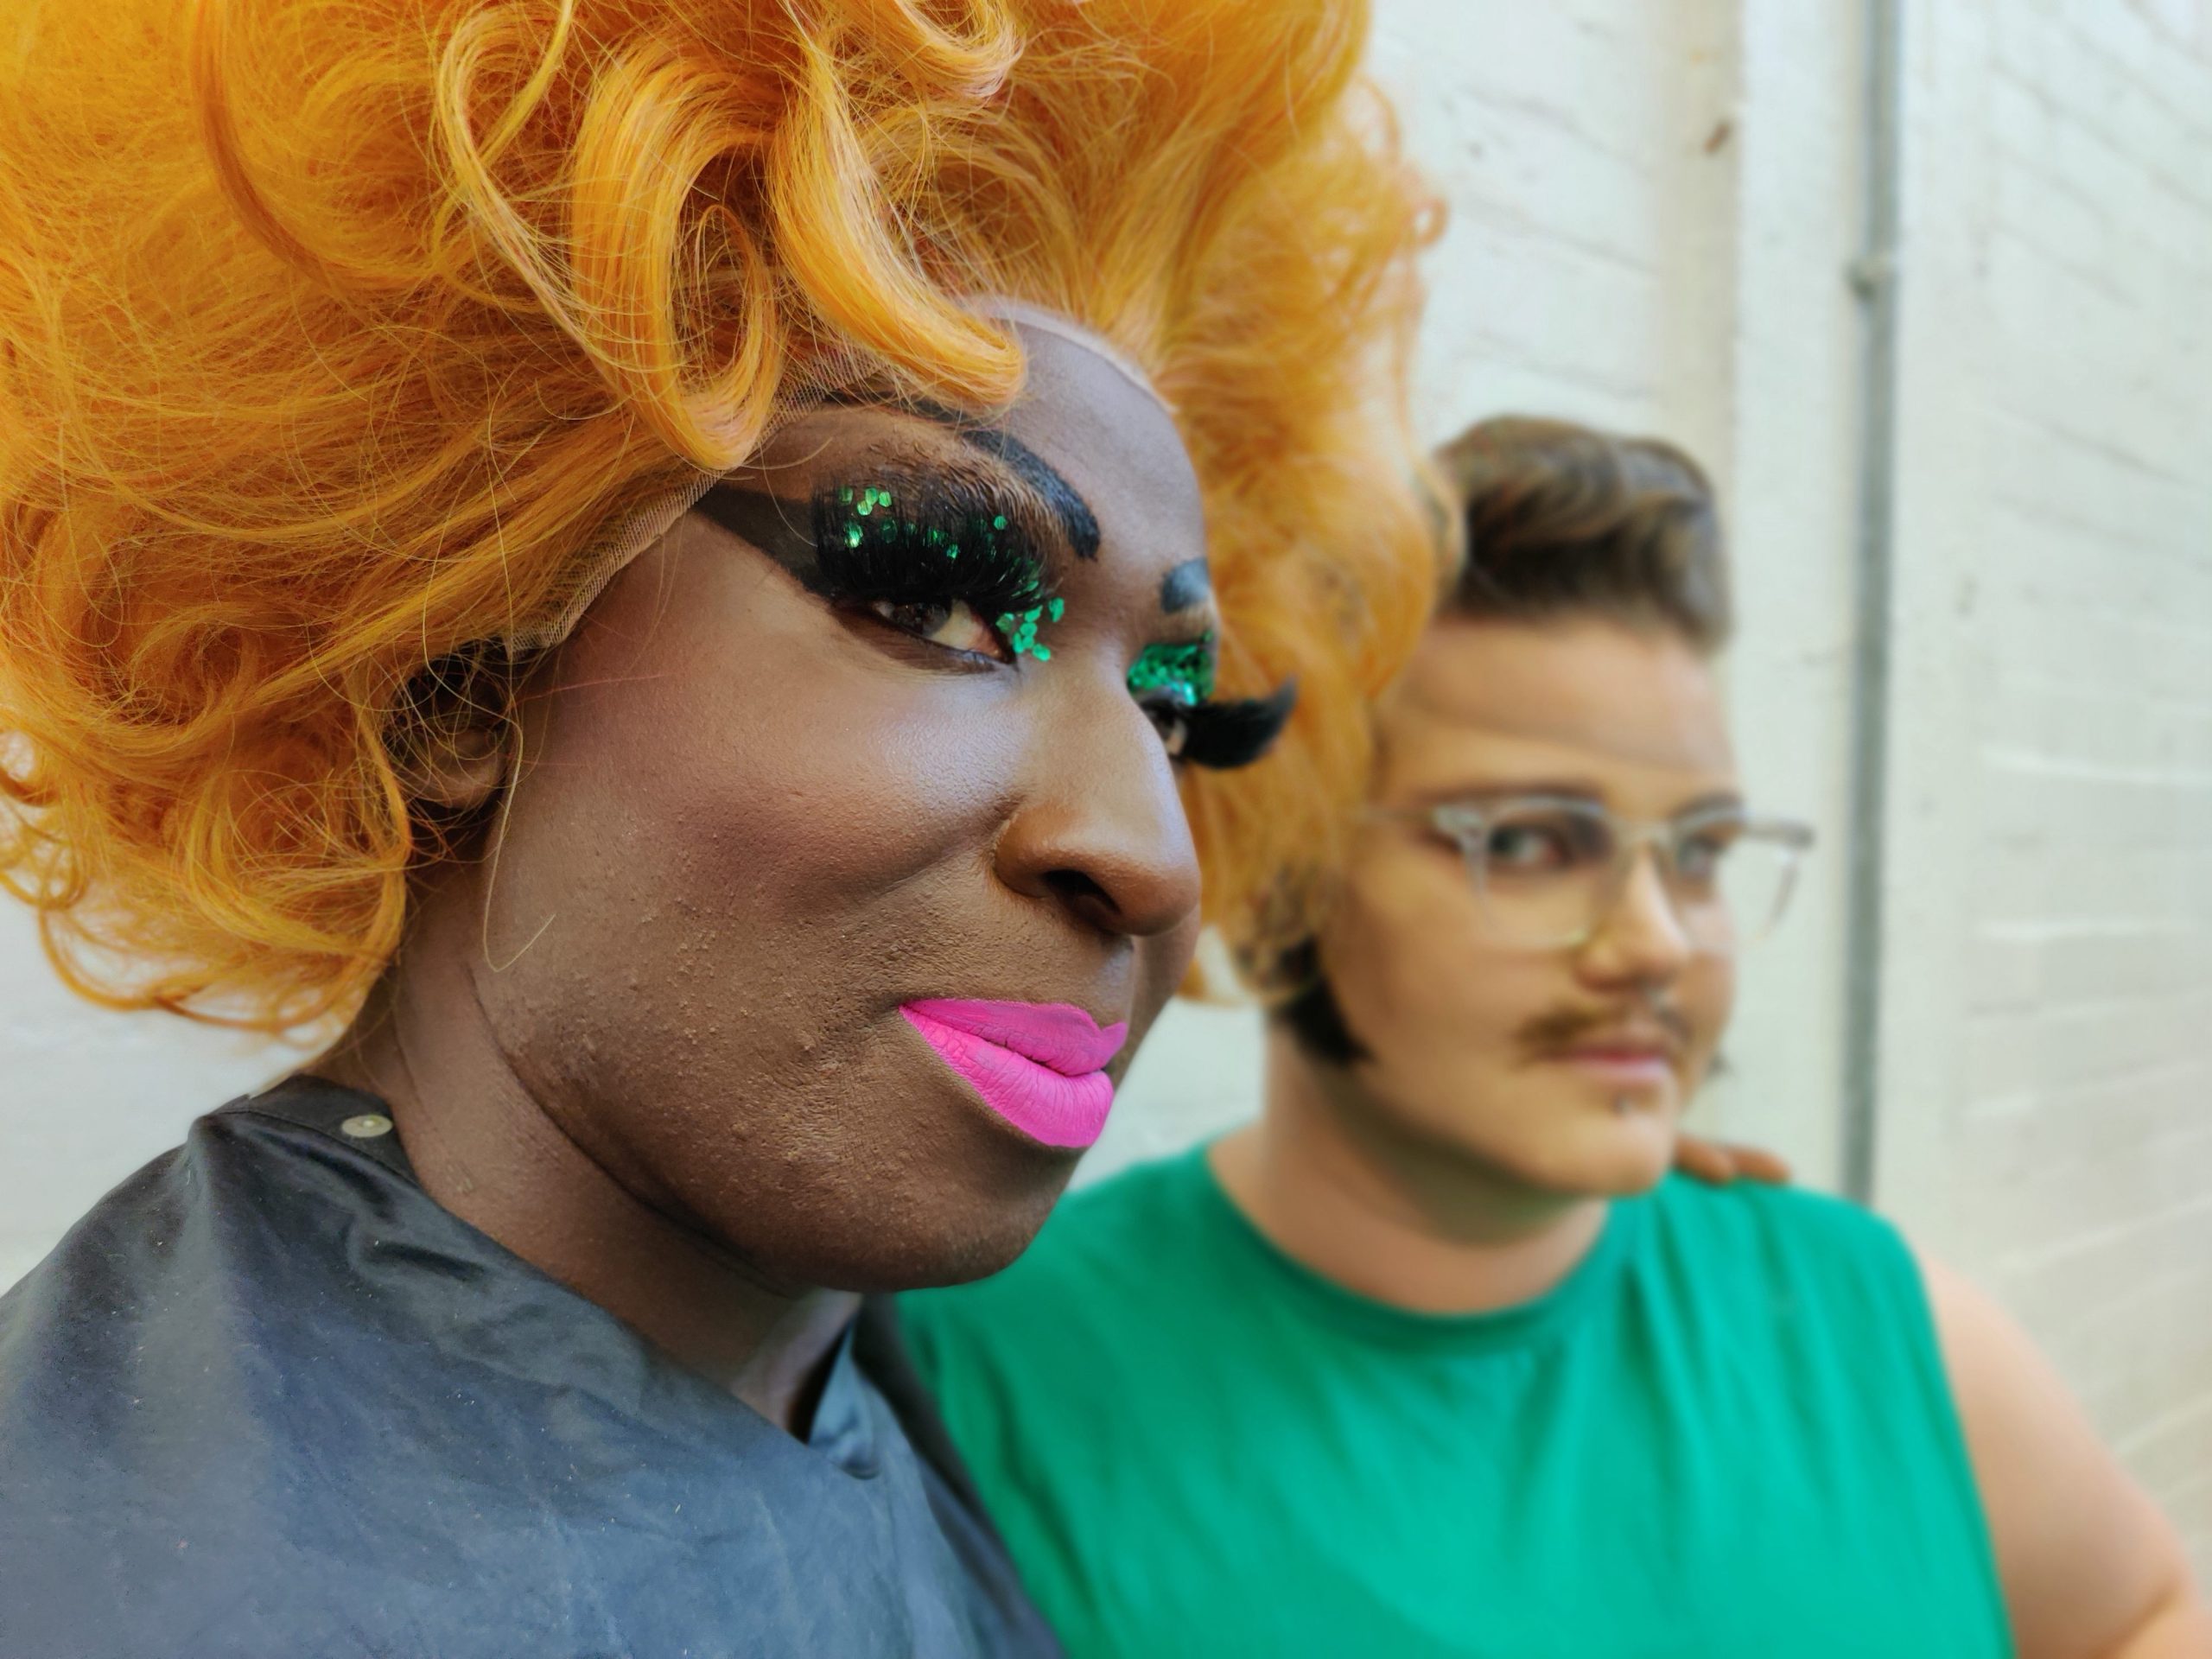 a close up image of a person in a large orange wig abd green glittery make up, with their arm around someone who is wearing a green t-shirt